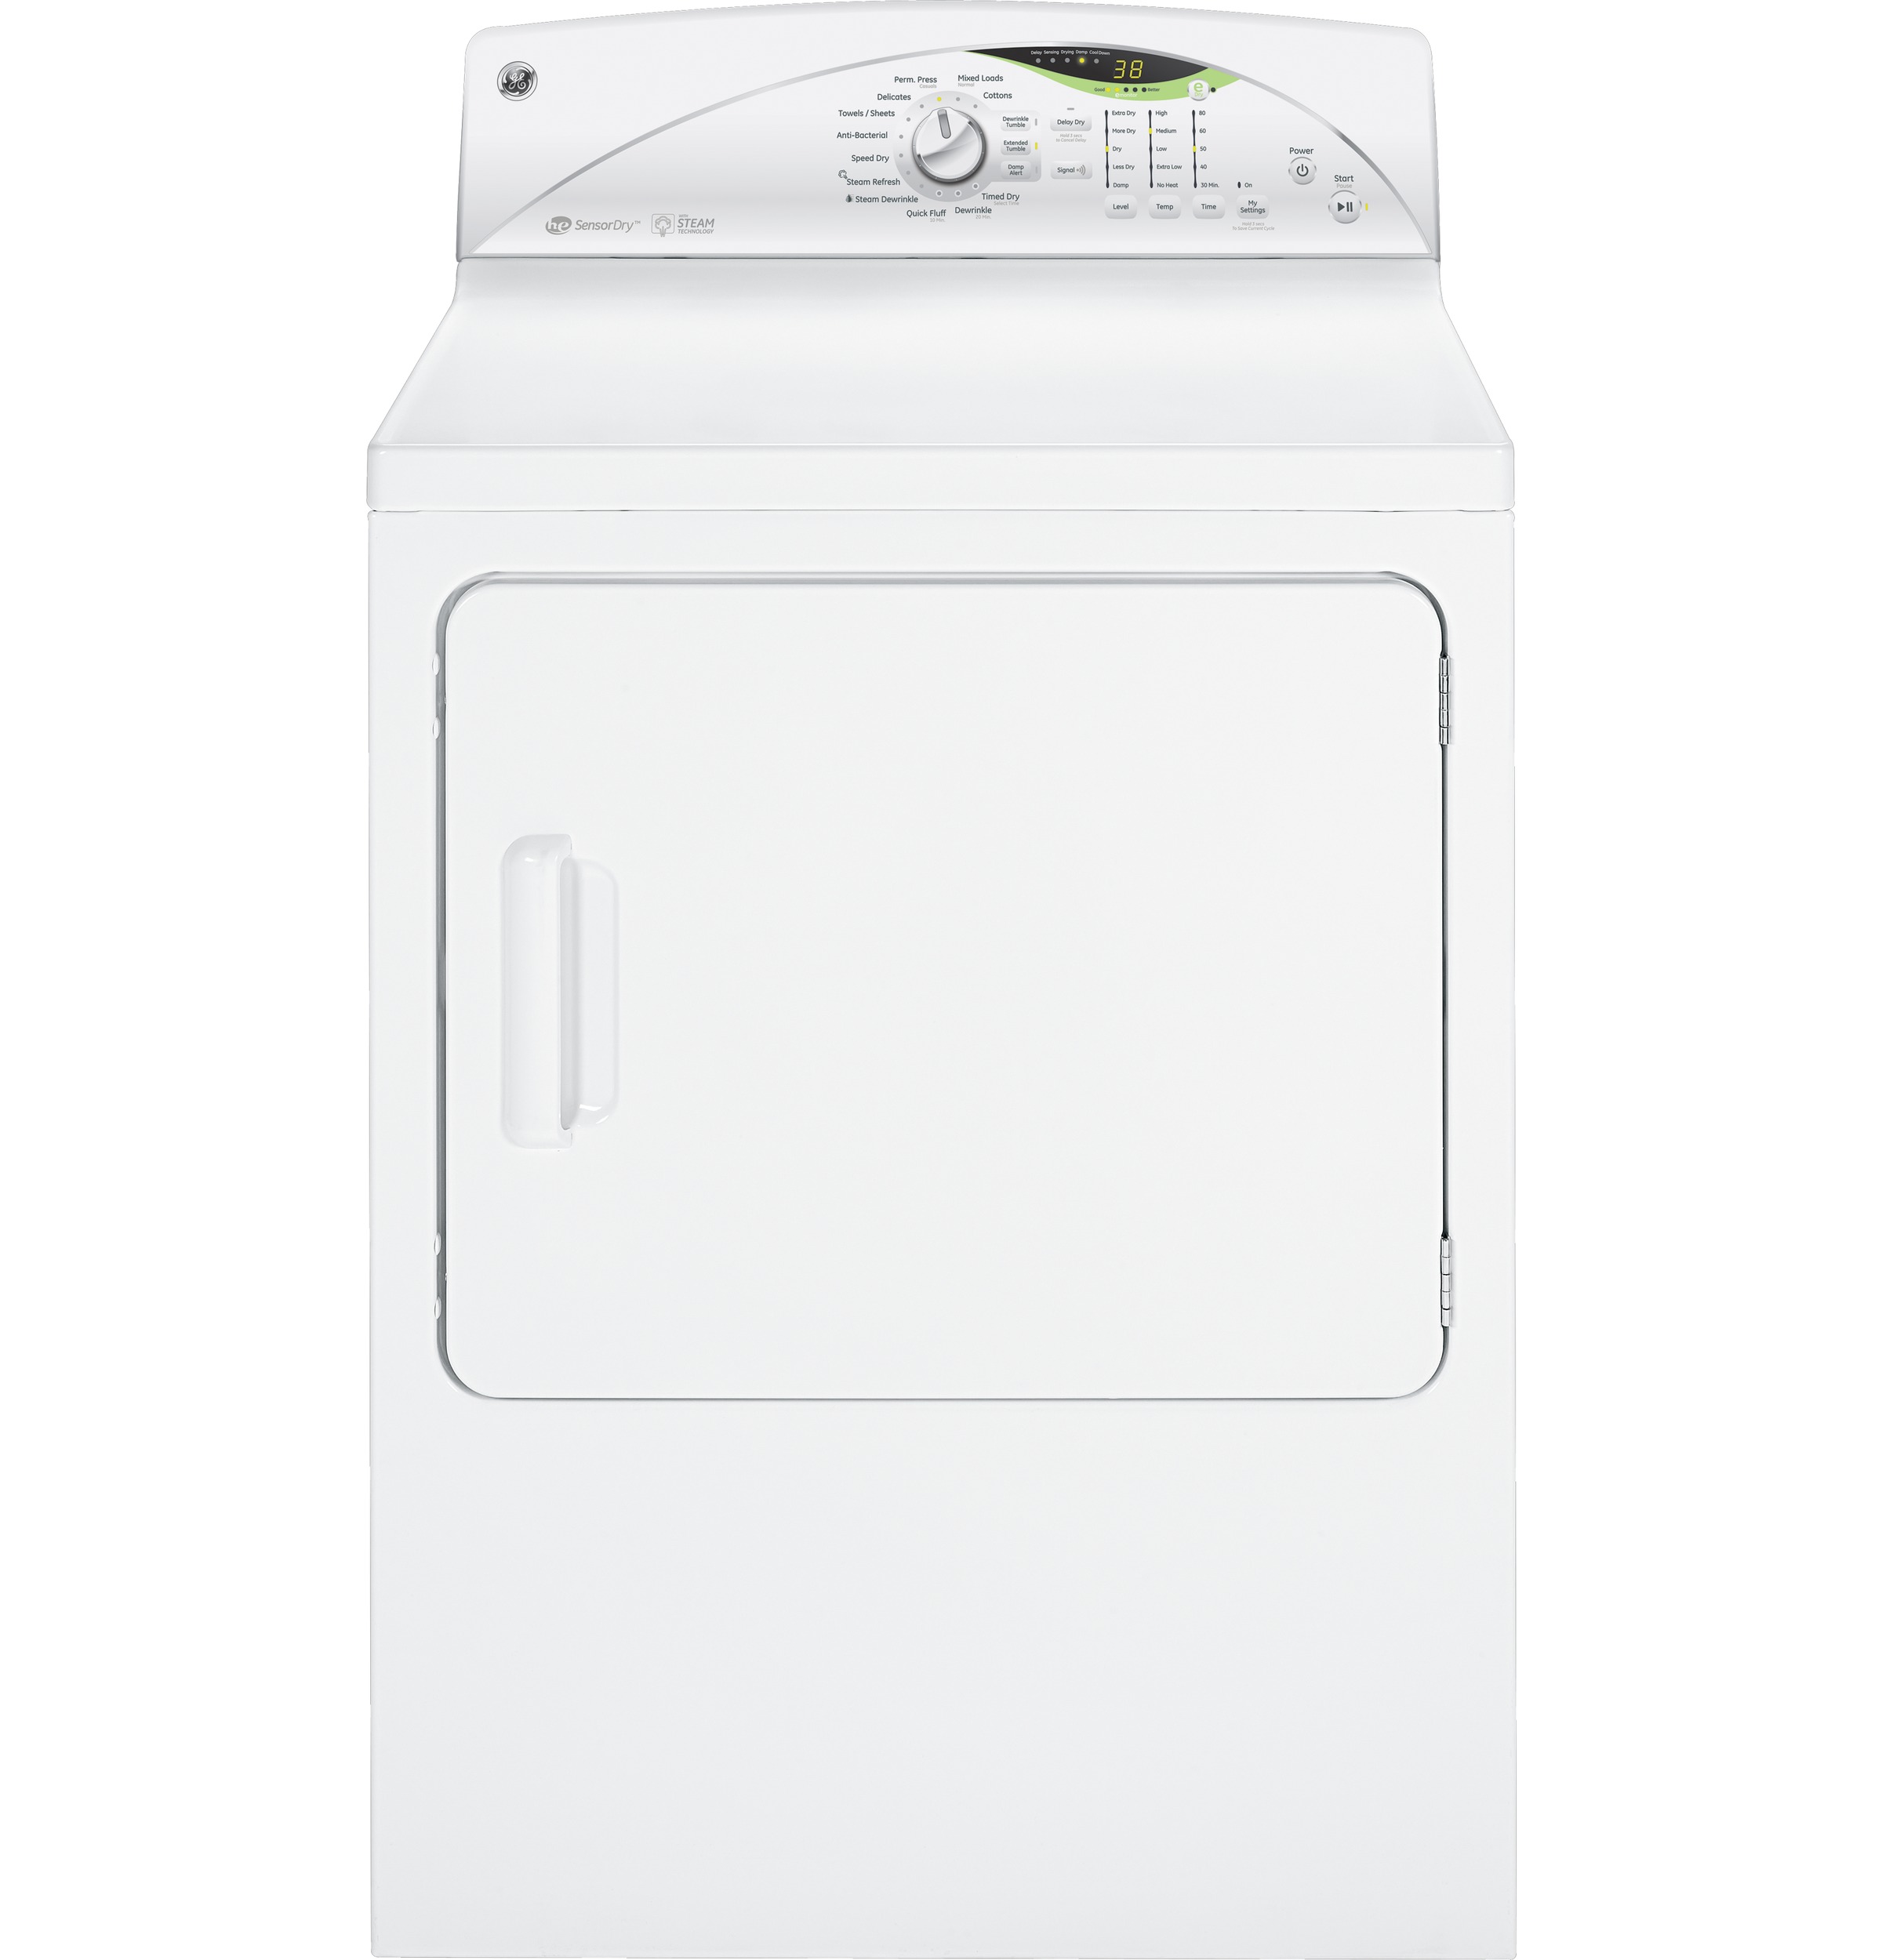 GE® 7.0 cu. ft. stainless steel capacity gas dryer with Steam and HE SensorDry™